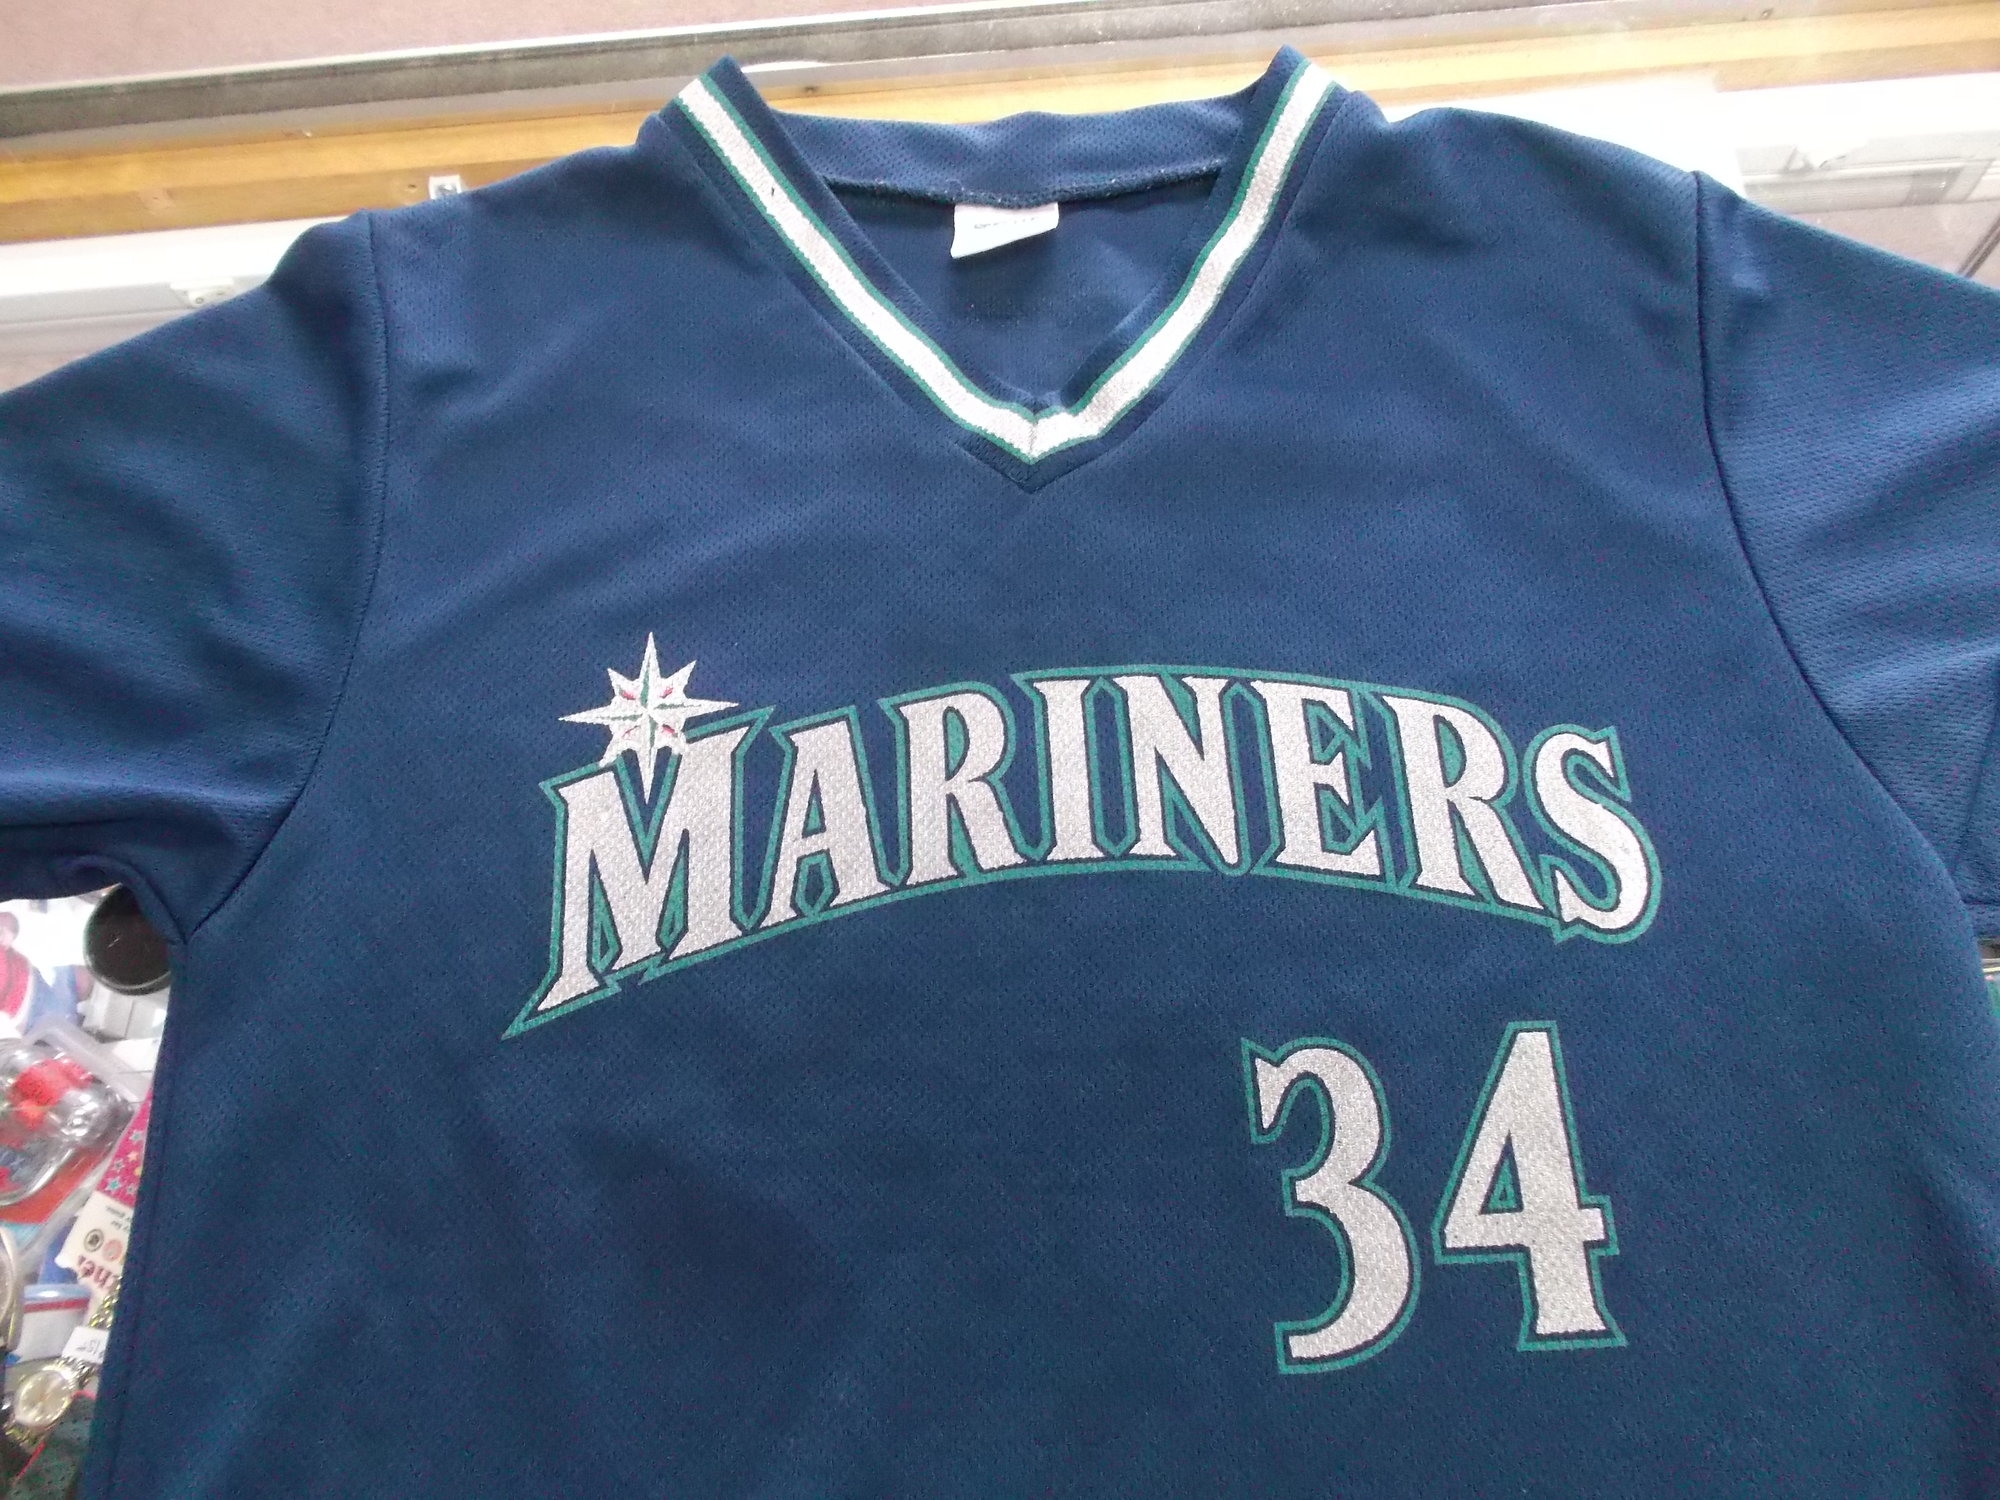 Youth Mariners jersey